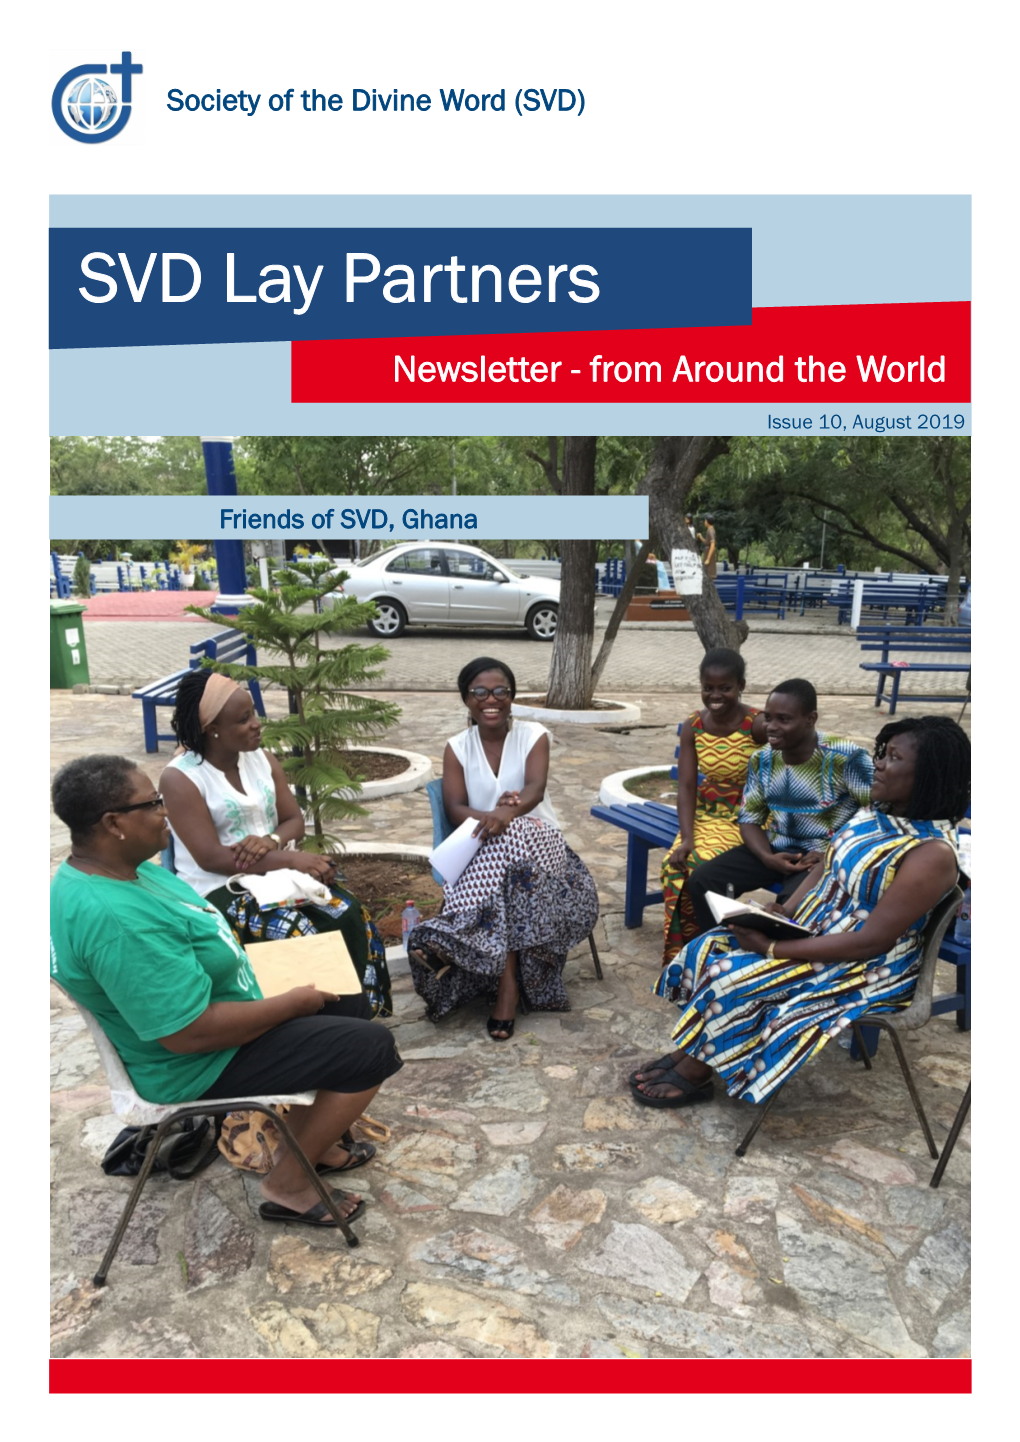 SVD Lay Partners Newsletter - from Around the World